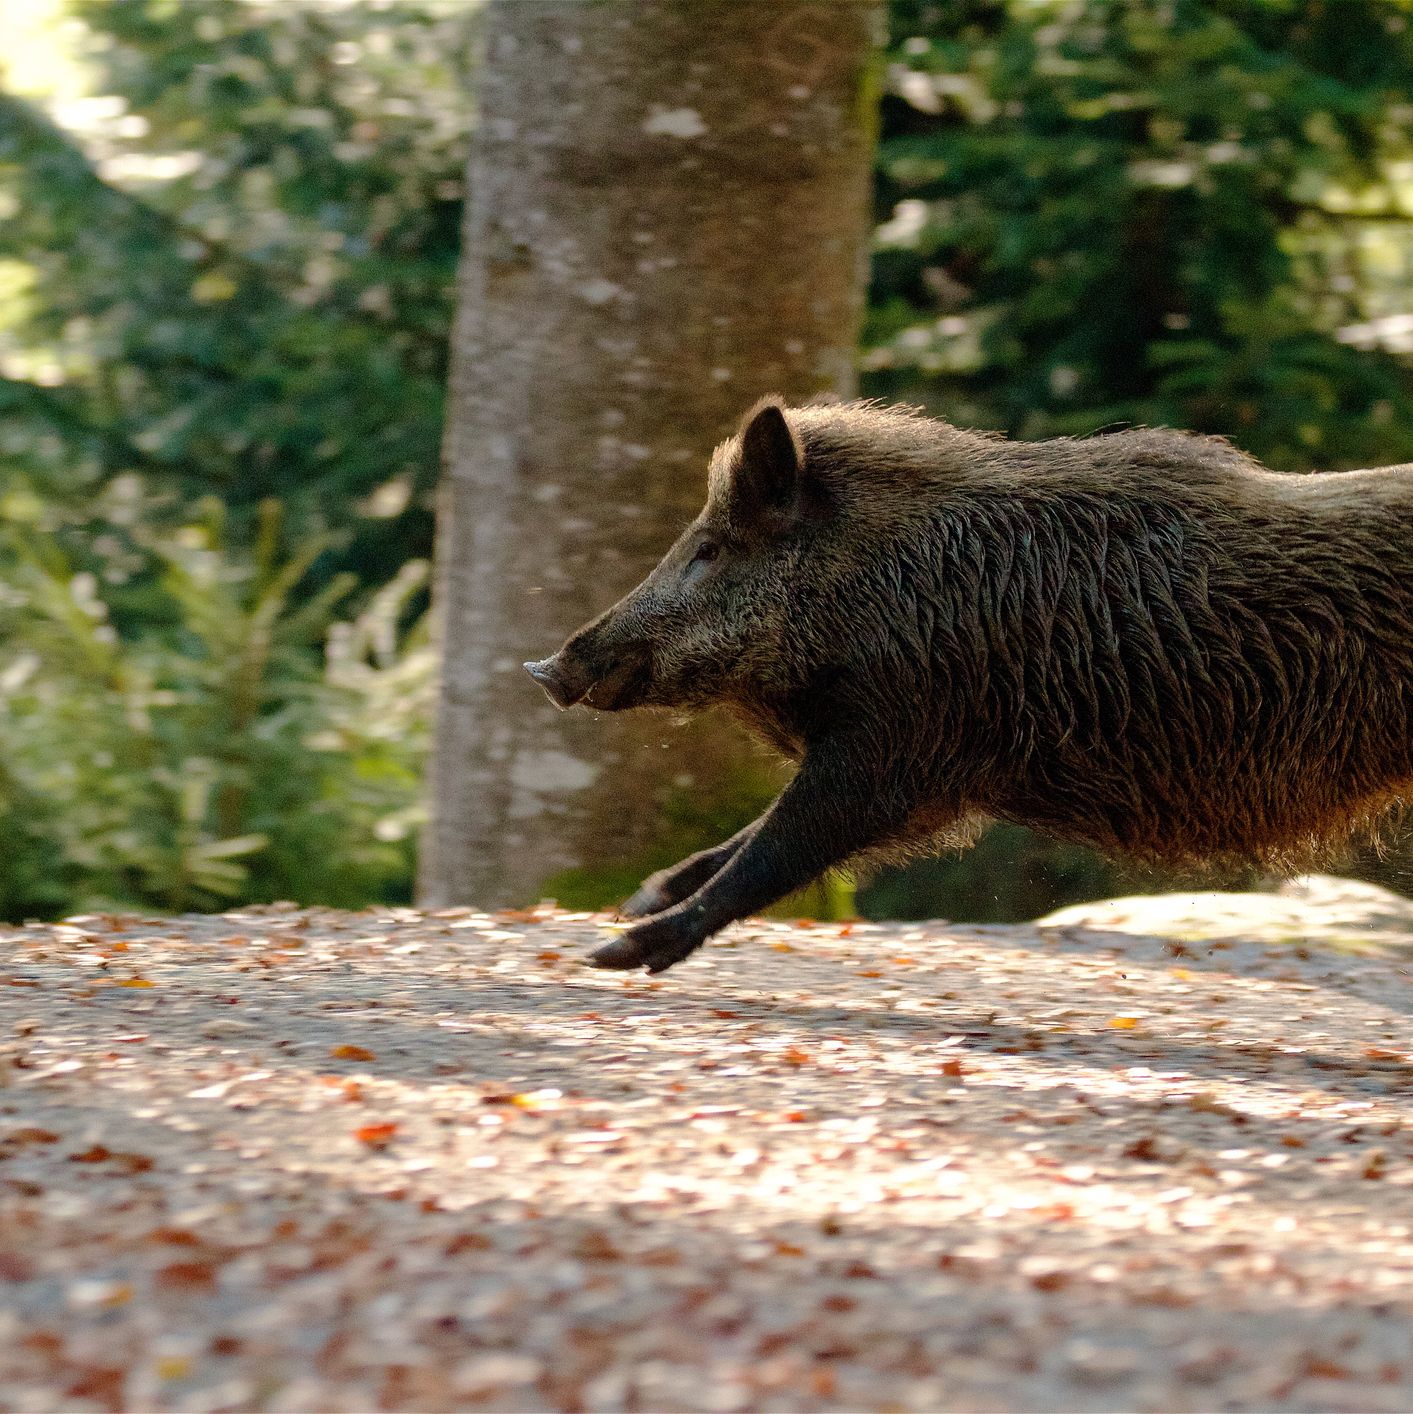 From Hog to Hog Wild: How a 'Stealth Gene' Transforms Pigs Into Wild Boars